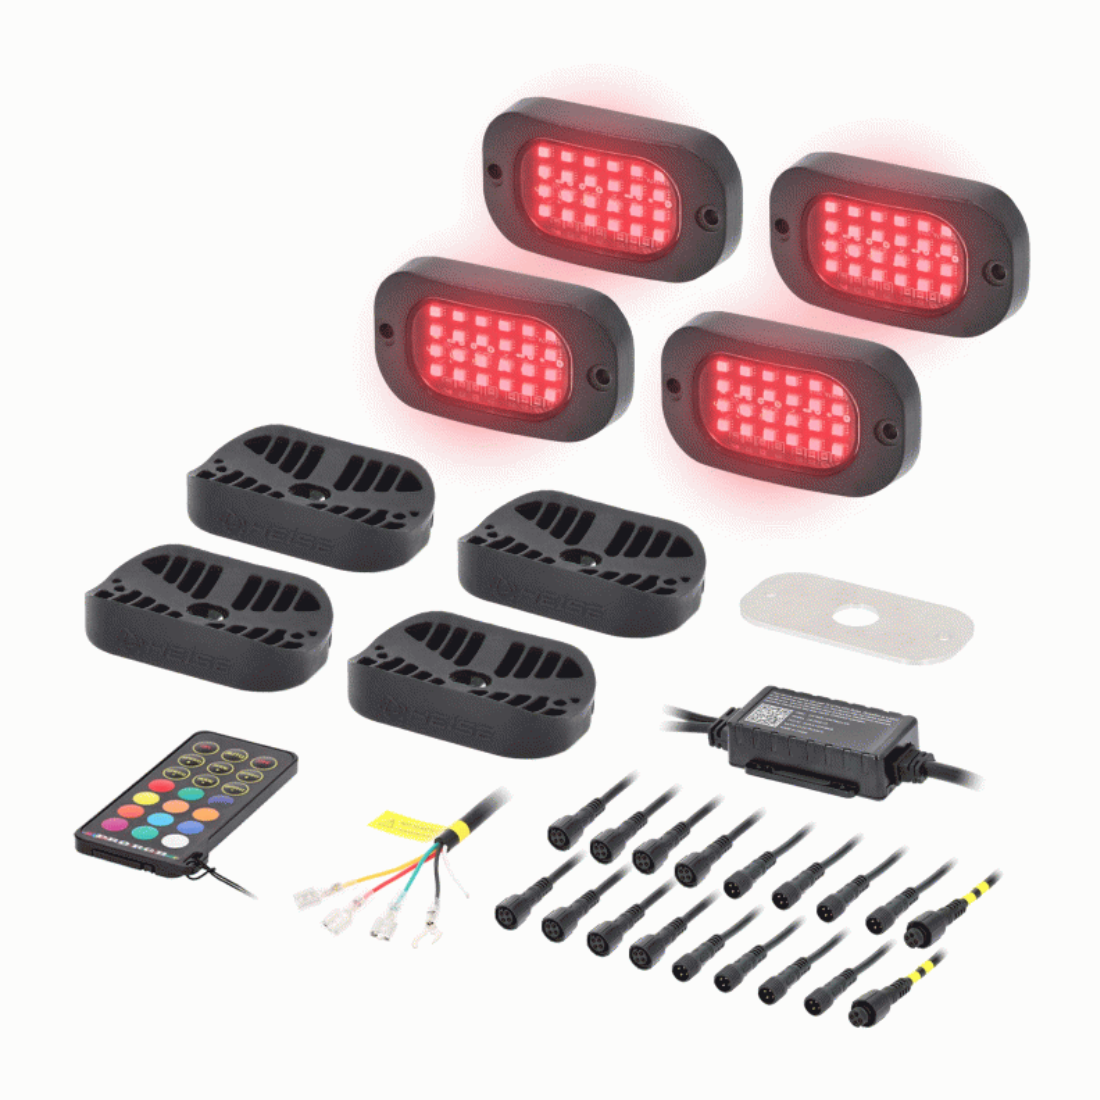 Heise HE-RGB-K4 Wide Angle RGB LED Rock Light with Controller - 4 Pack